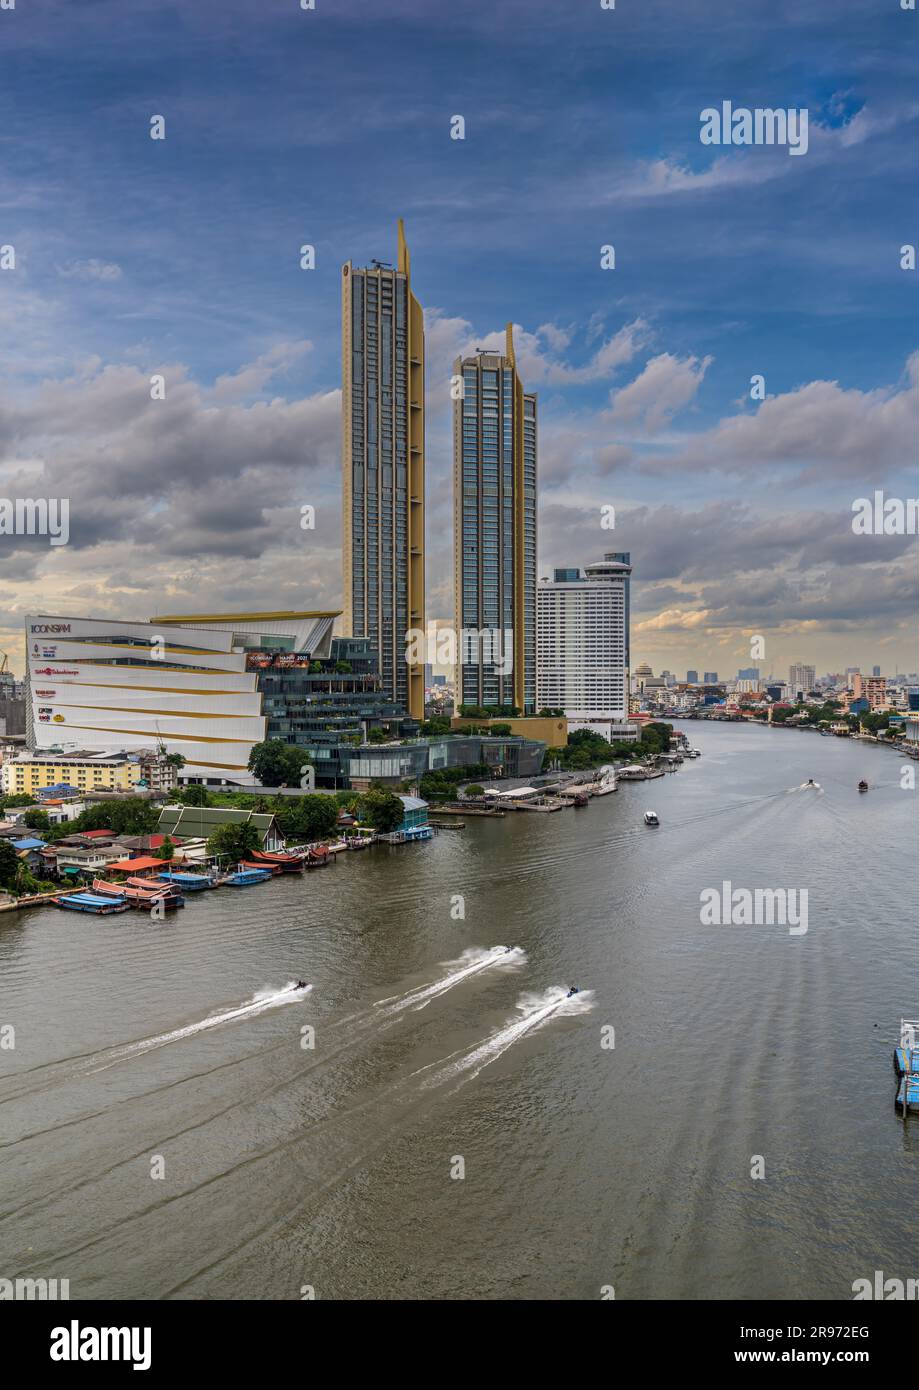 High viewpoint of the Chao Phraya River with Jet skis ICON SIAM Shopping Mall and residential skyscrapers. Stock Photo